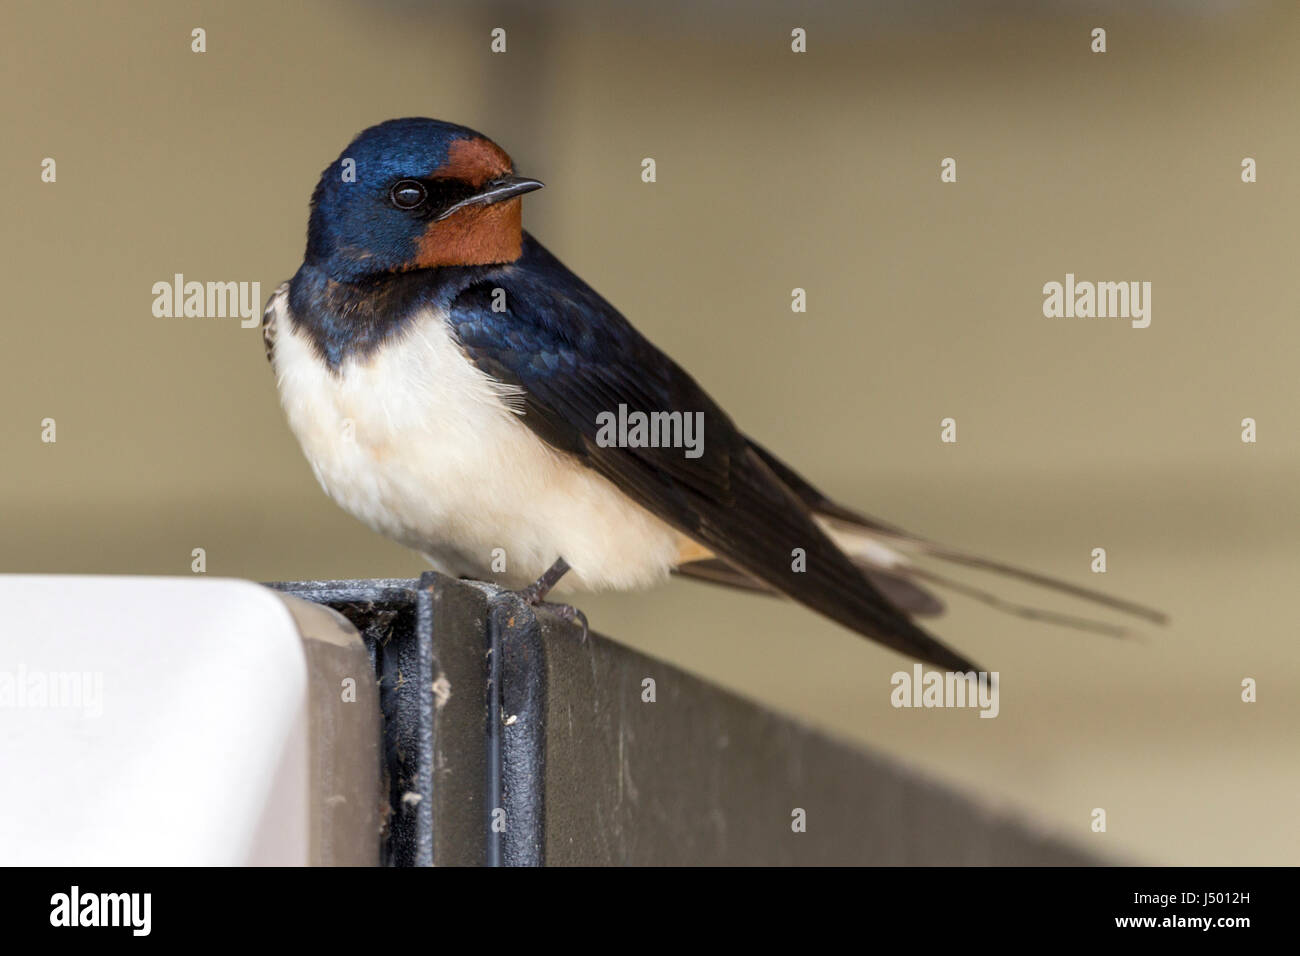 Swallow resting on top corner of confectionery dispenser near entrace to zoo. May be nesting under cover nearby as returns to spot again if disturbed. Stock Photo